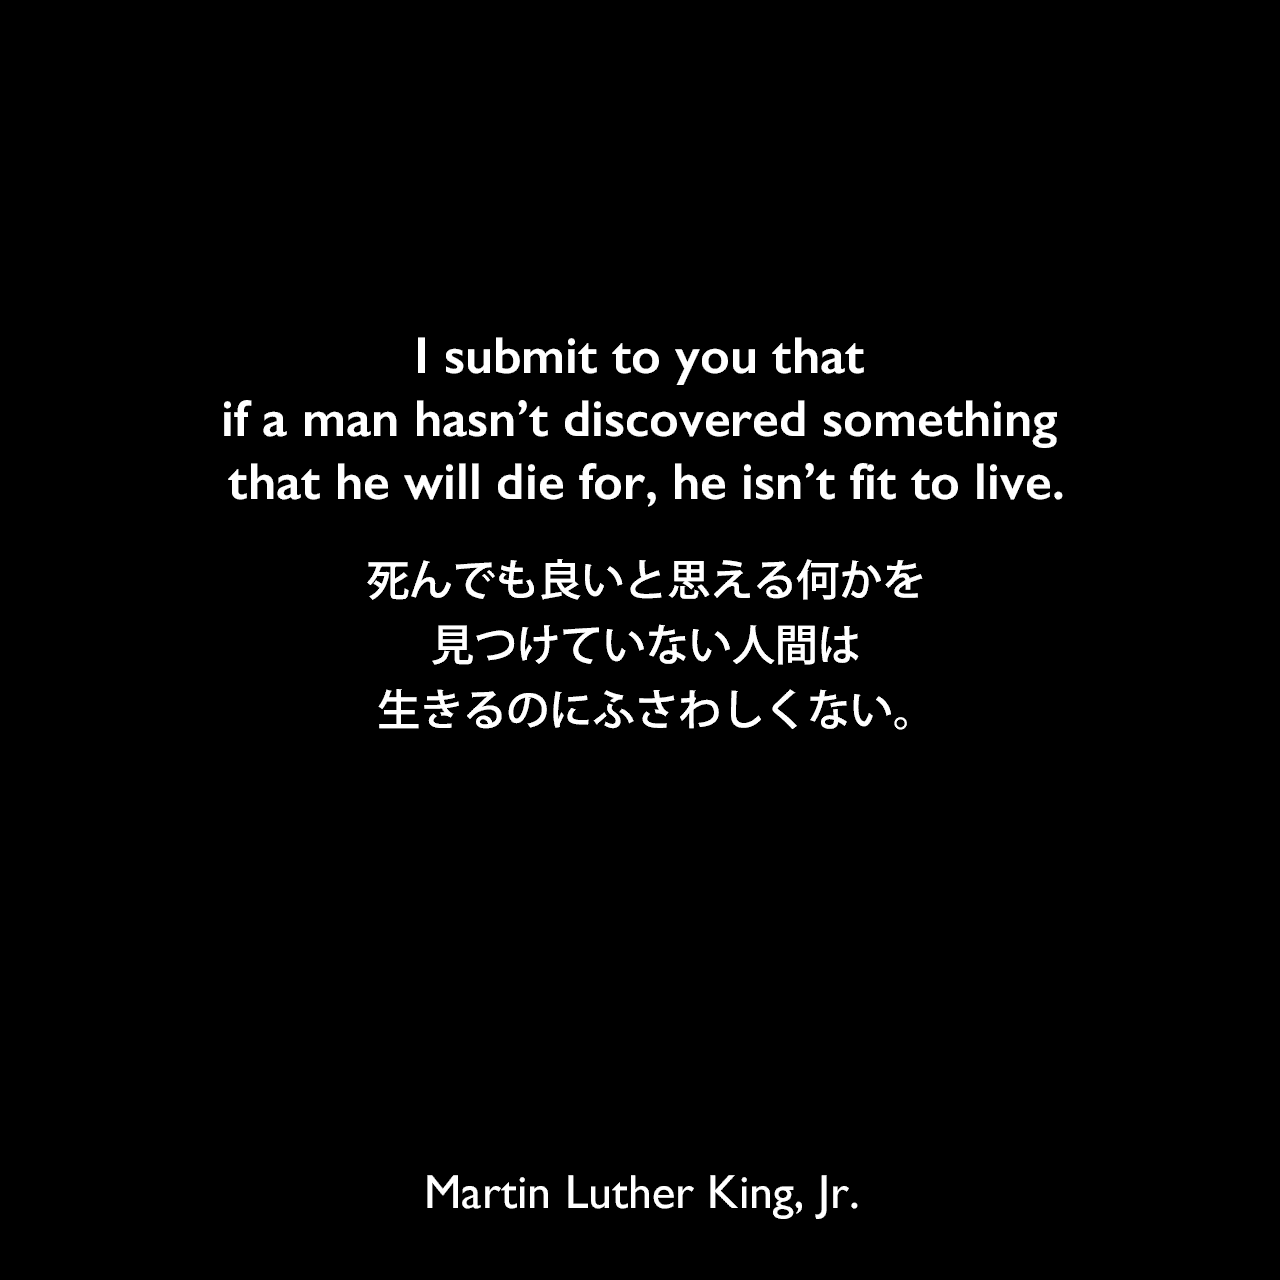 I submit to you that if a man hasn’t discovered something that he will die for, he isn’t fit to live.死んでも良いと思える何かを見つけていない人間は、生きるのにふさわしくない。- 1963年の演説「Cobo Center speech」よりMartin Luther King, Jr.